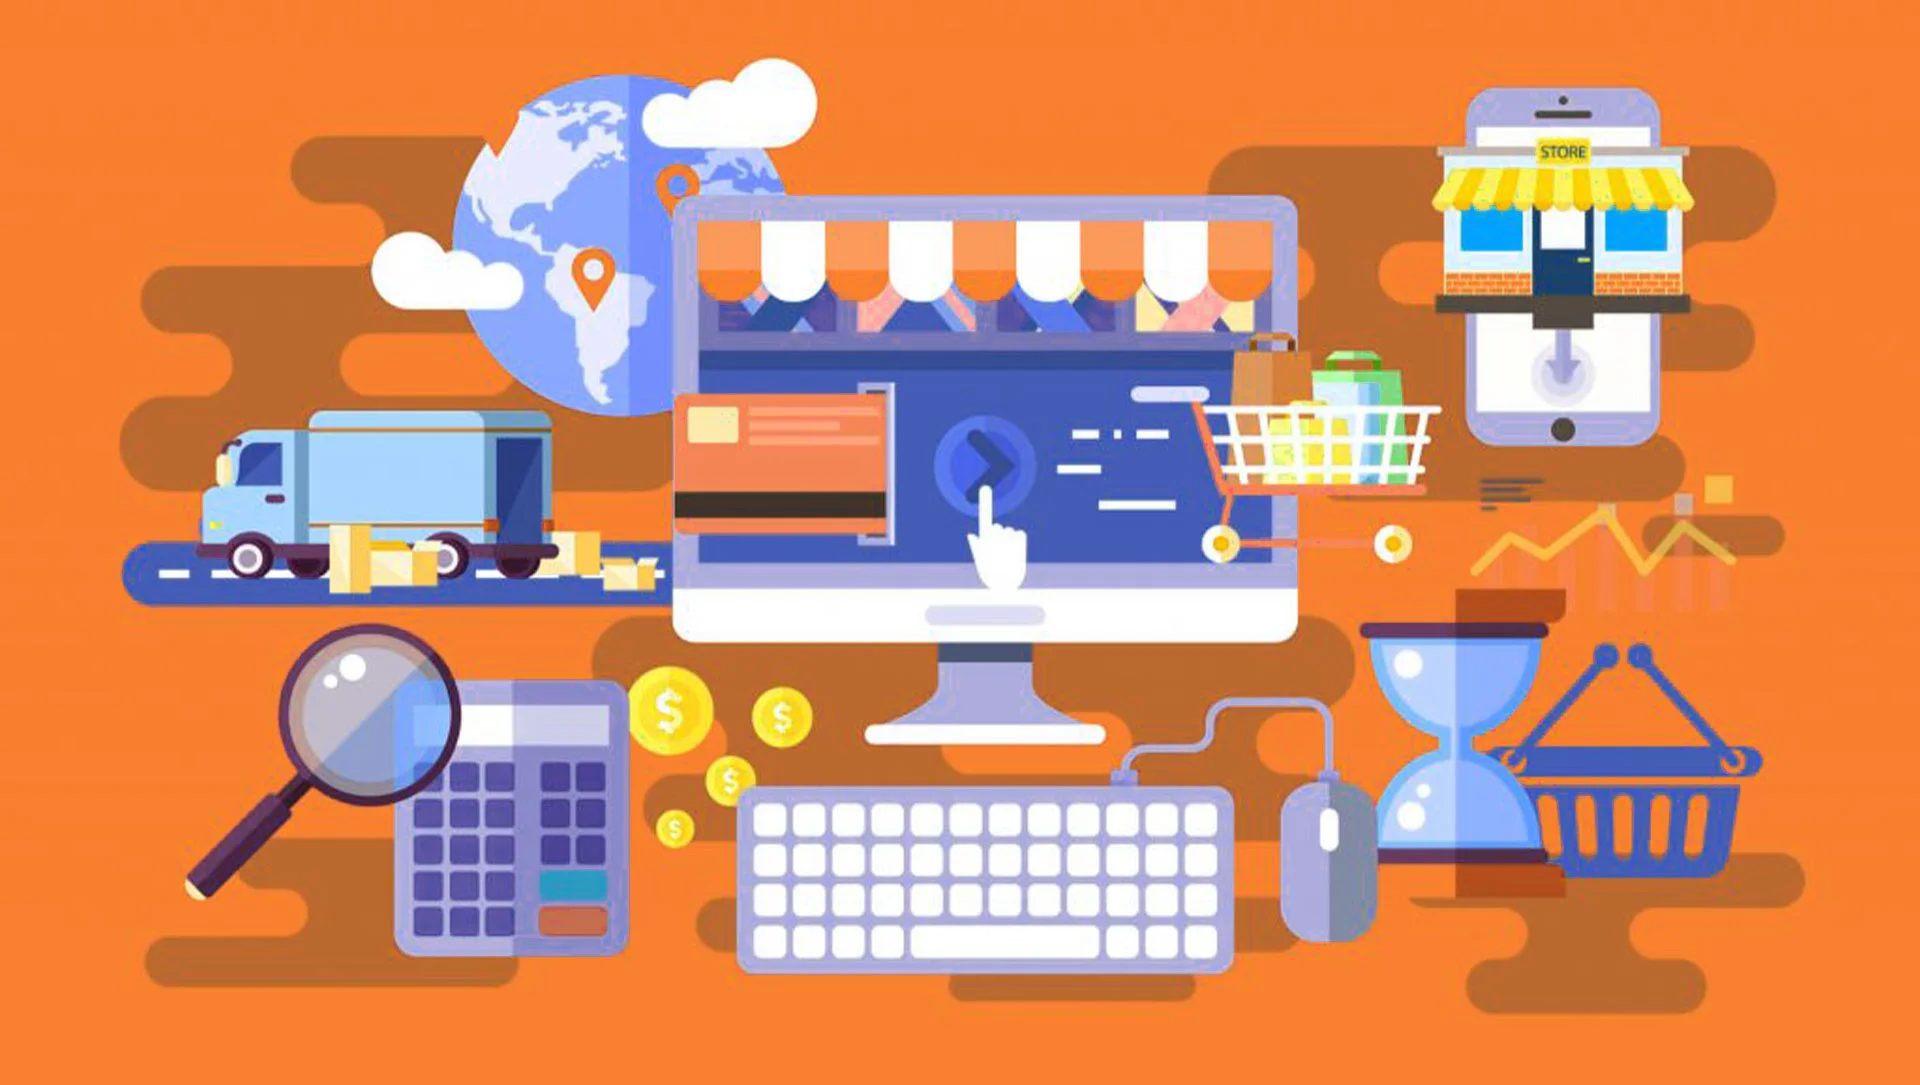 ecommerce-security-importance-factors-mistakes-how-to-avoid-them-related-blog-14